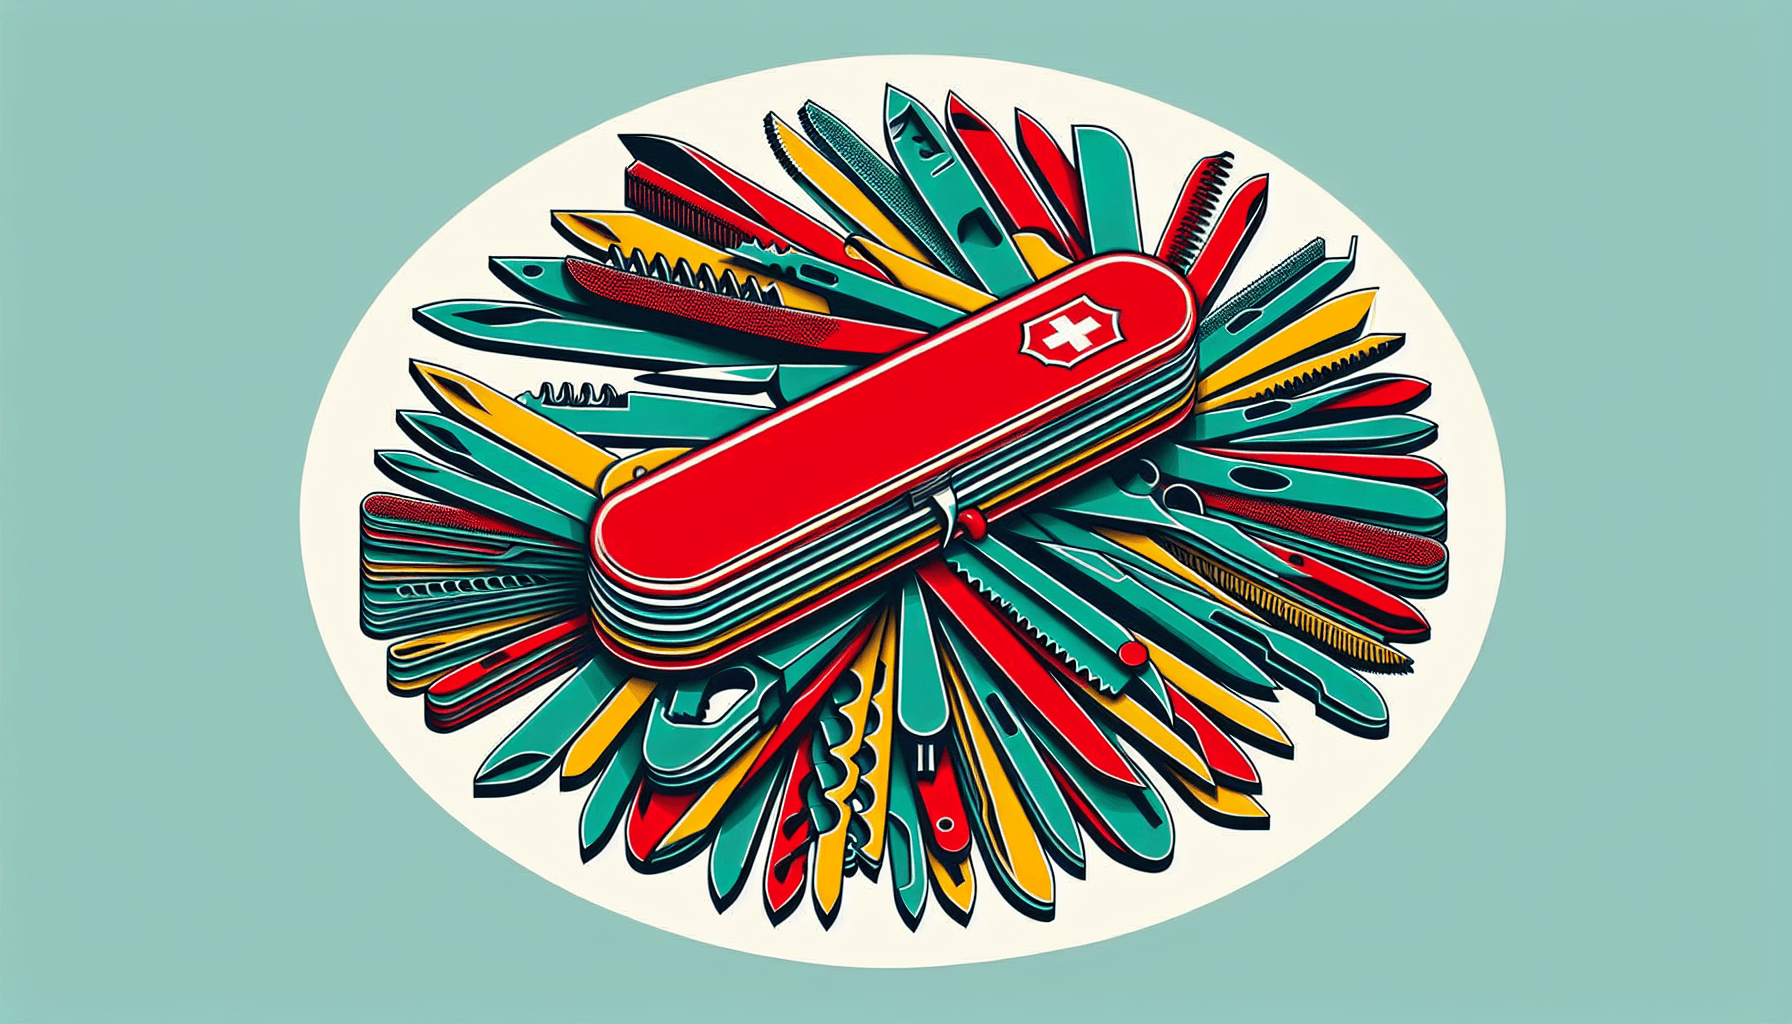 Swiss Army knife in flat illustration style and white background, red #f47574, green #88c7a8, yellow #fcc44b, and blue #645bc8 colors.